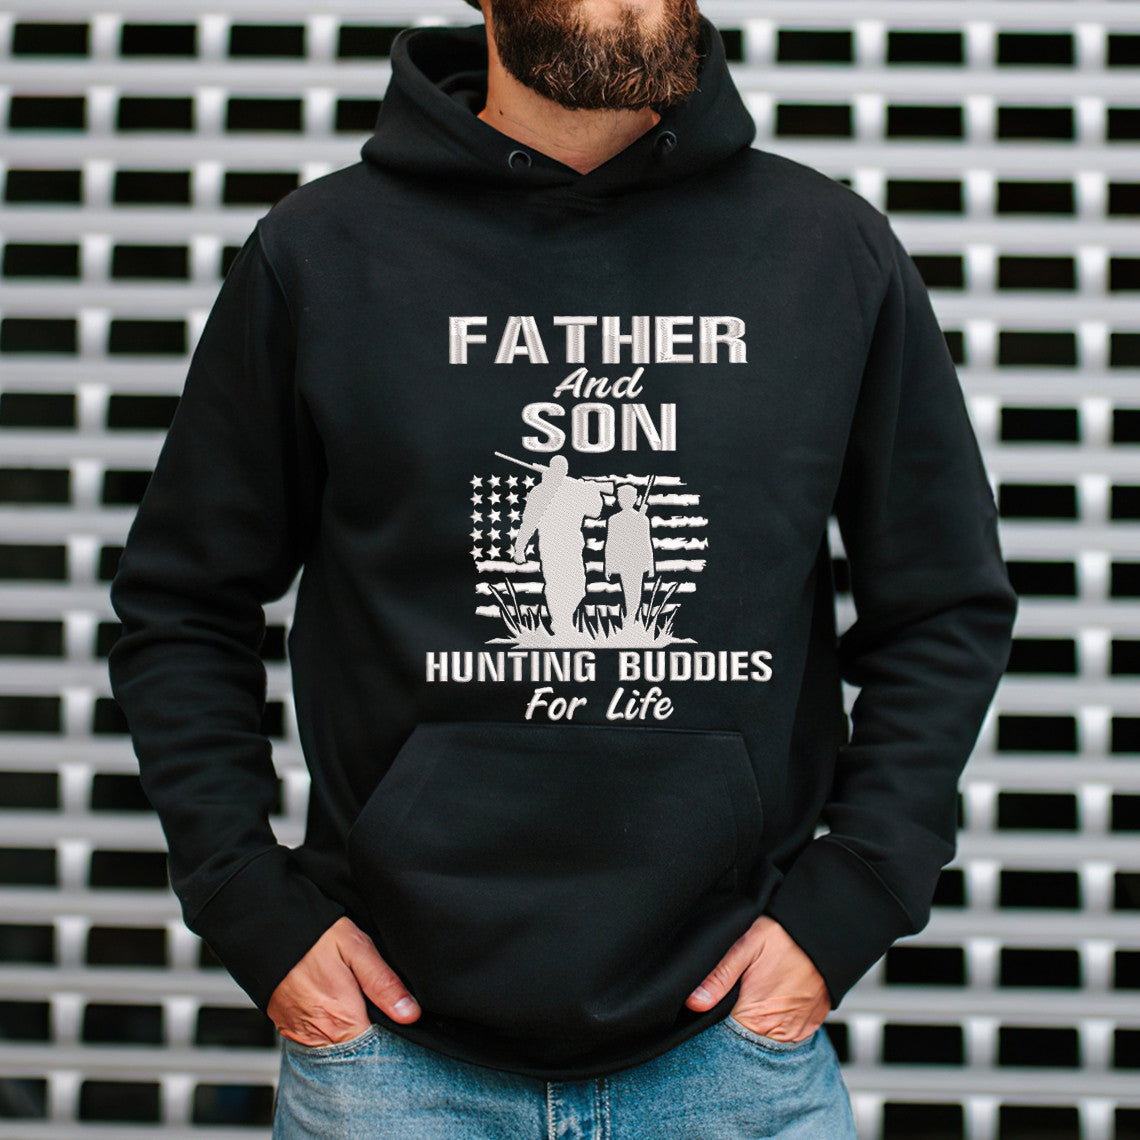 Father And Son Hunting Buddies For Life Embroidered Sweatshirt - Embroidered Hoodie Tad